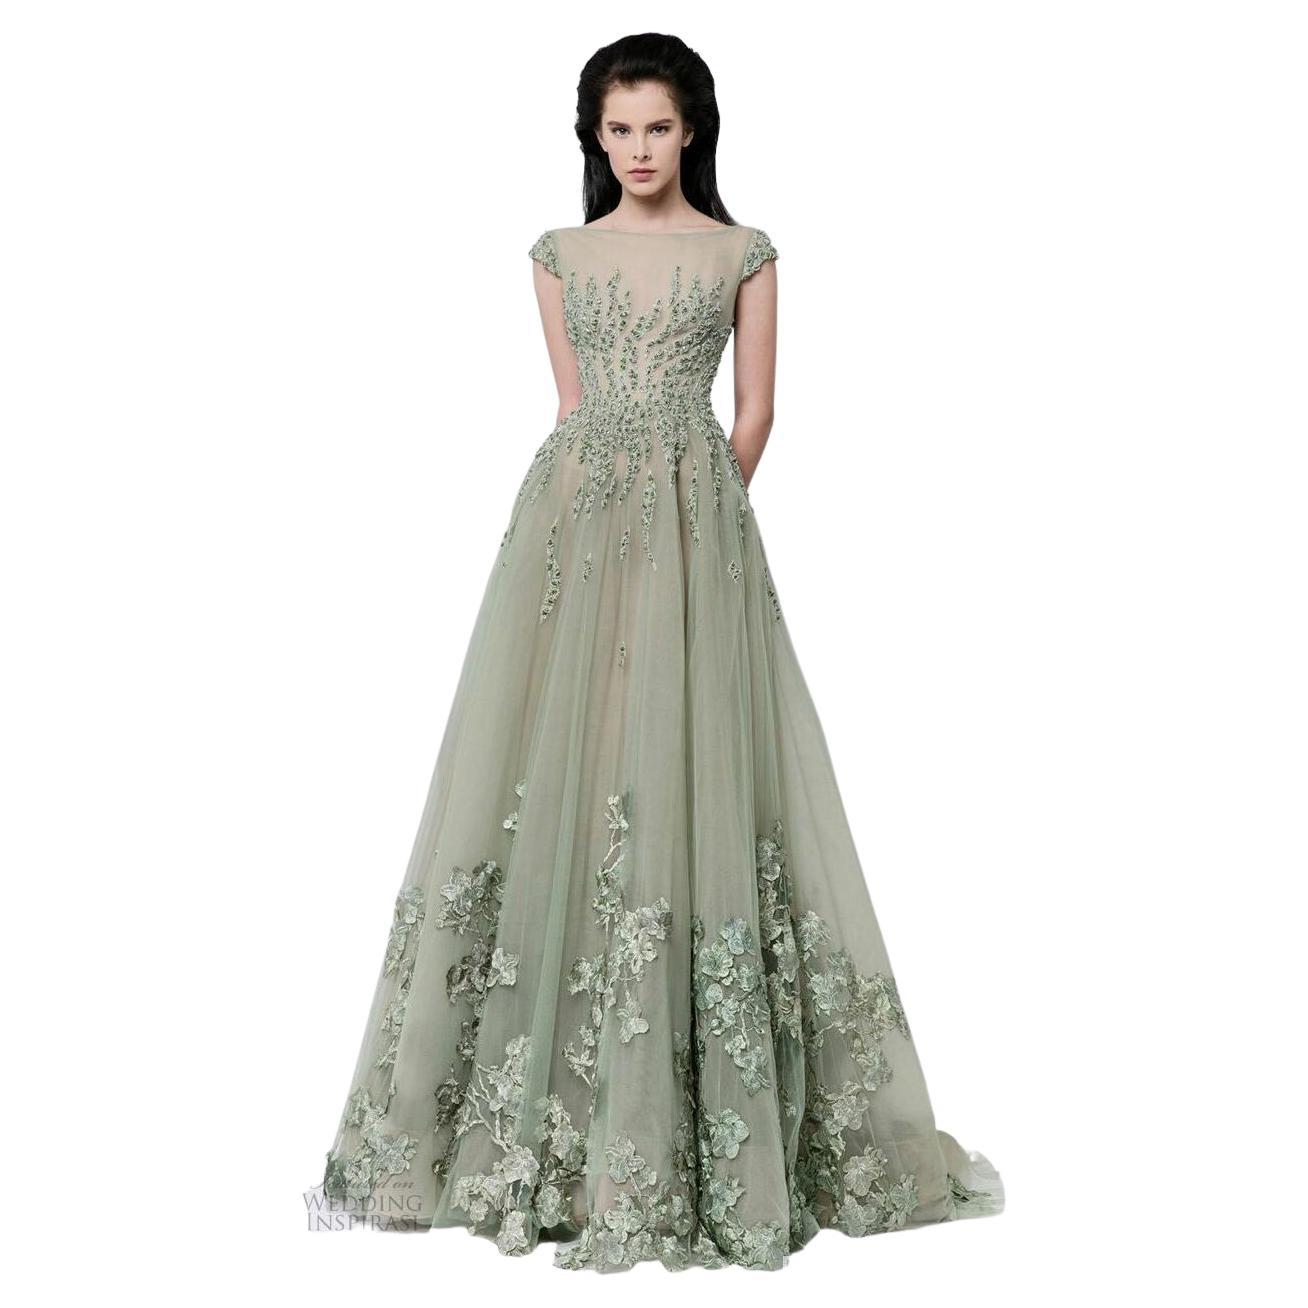 TONY WARD

GREEN BALL GOWN DRESS

collection Spring-Summer 2016 in olive color from silk and mesh with embroidery

Content: 30% silk, 70 % acetate

Size EU 40

Pre-owned, excellent condition! Worn once
 100% authentic guarantee 

       PLEASE VISIT